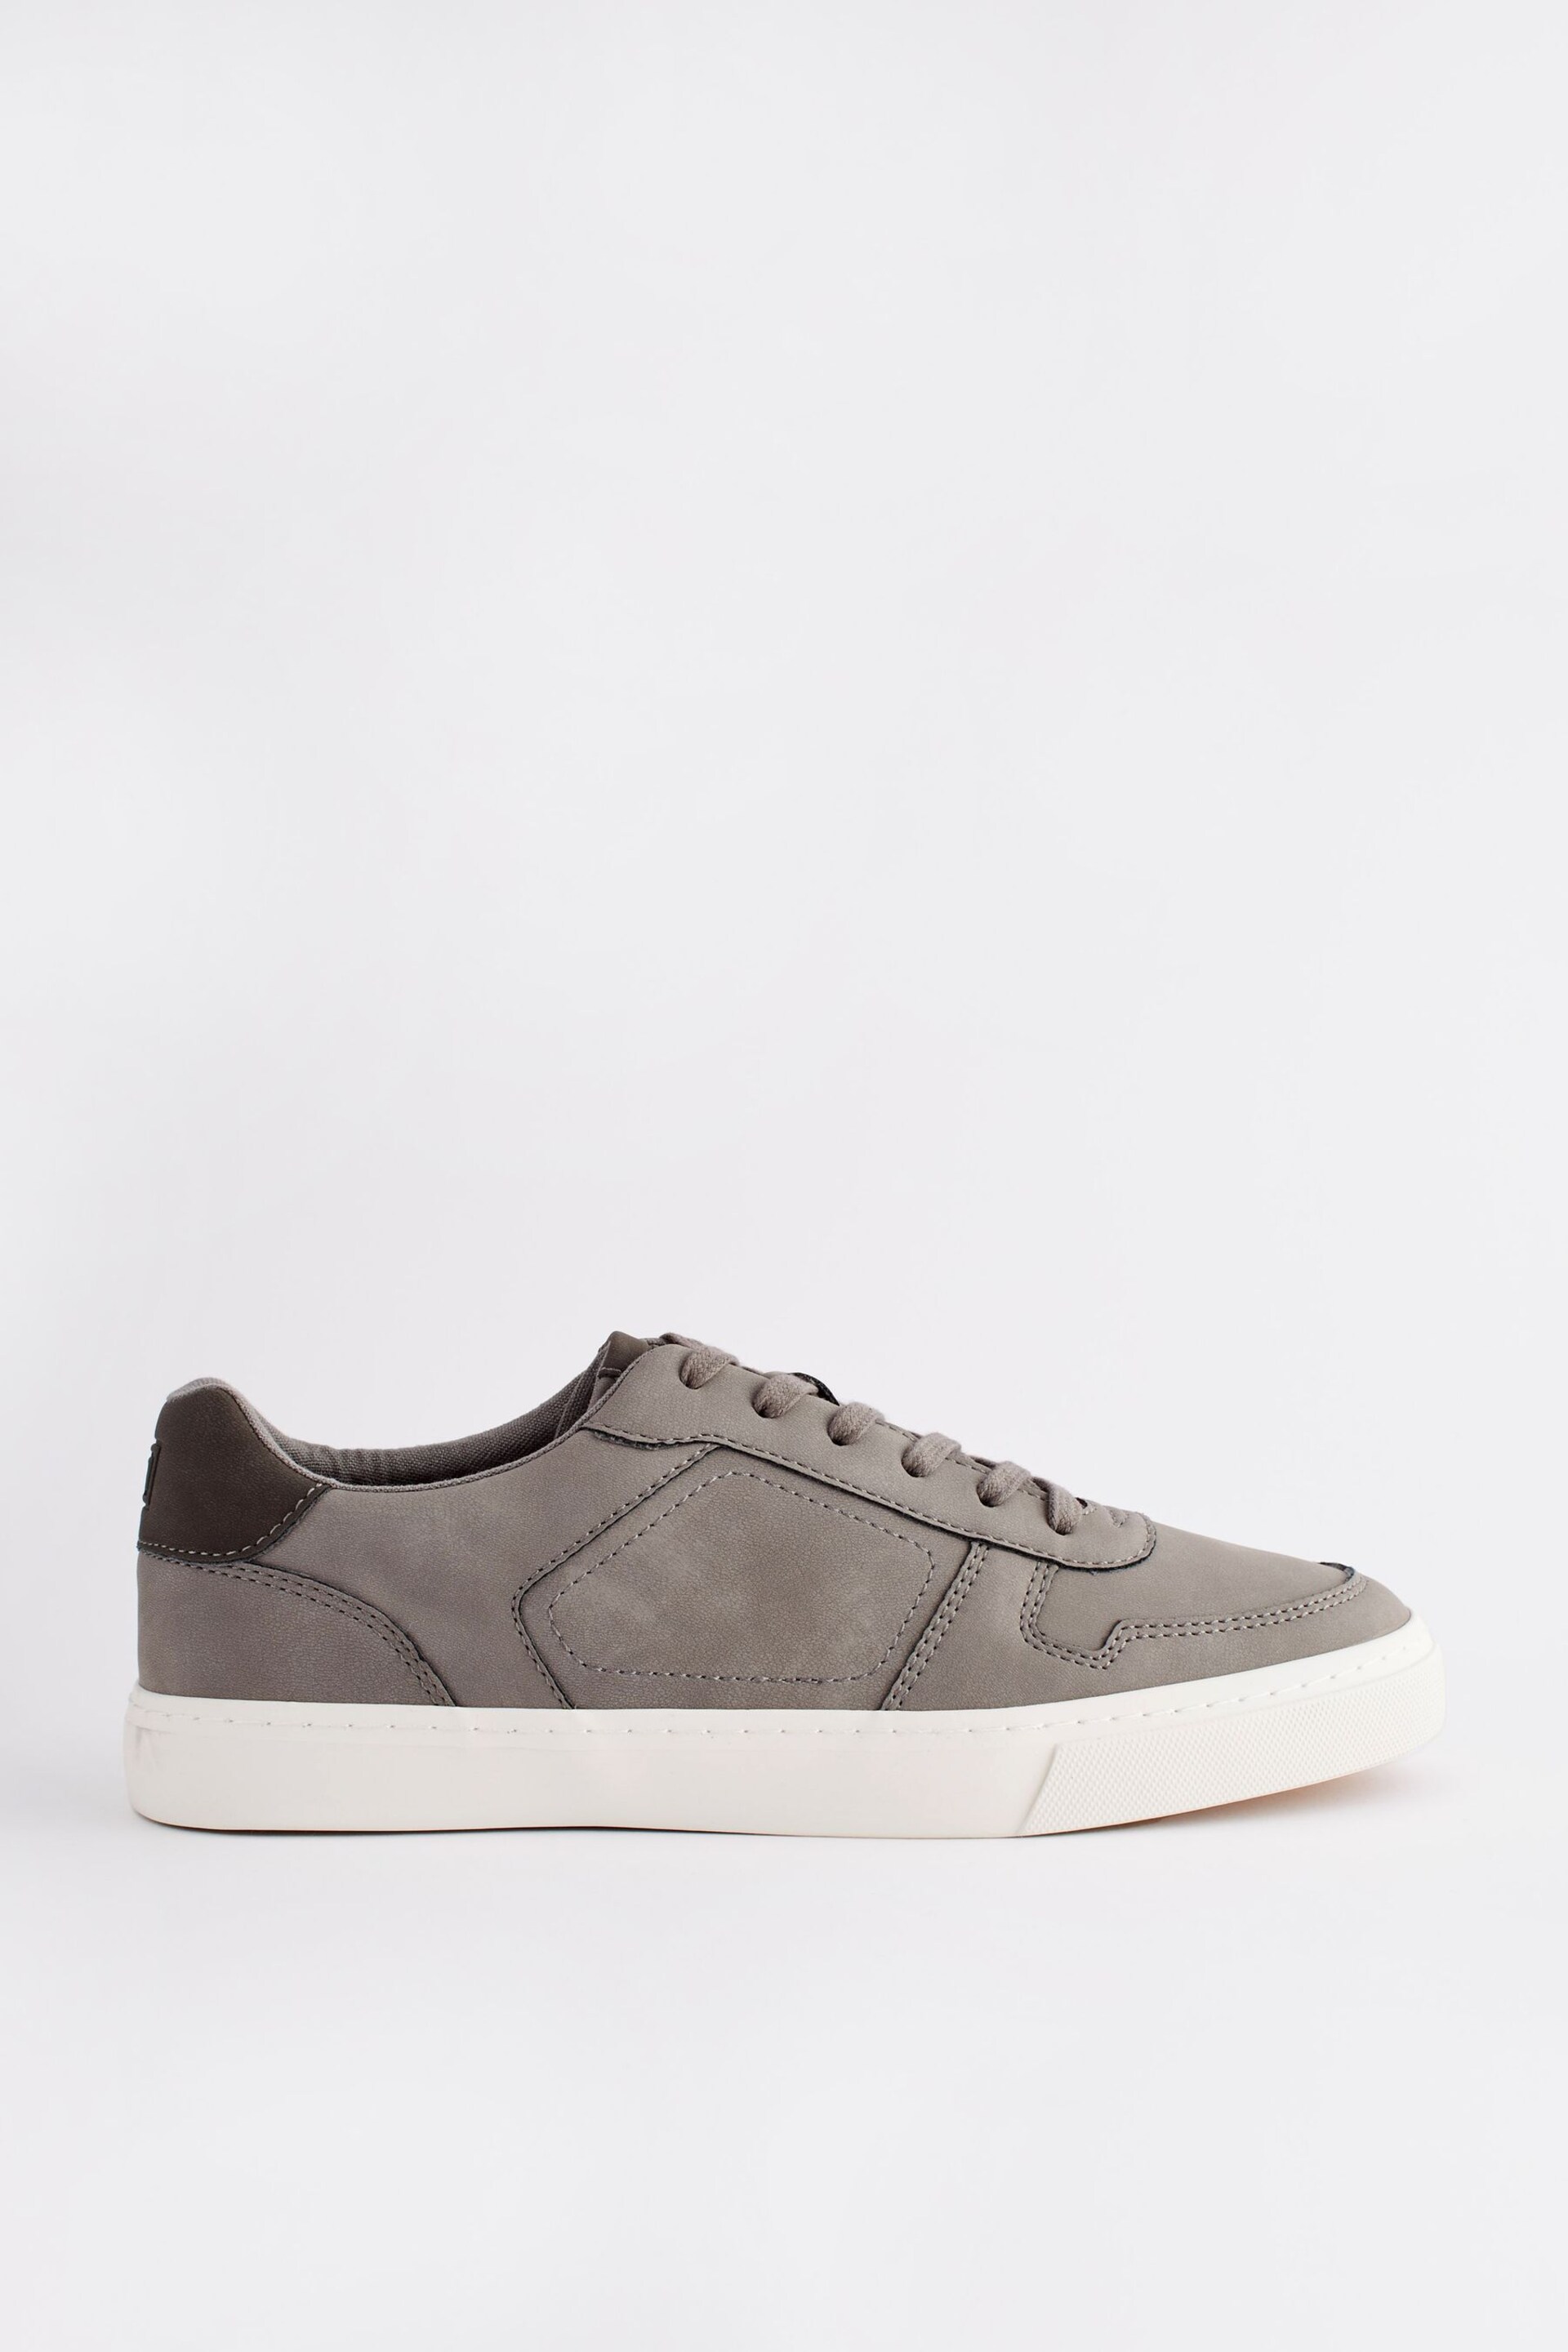 Grey Lace Up Low Trainers - Image 2 of 5